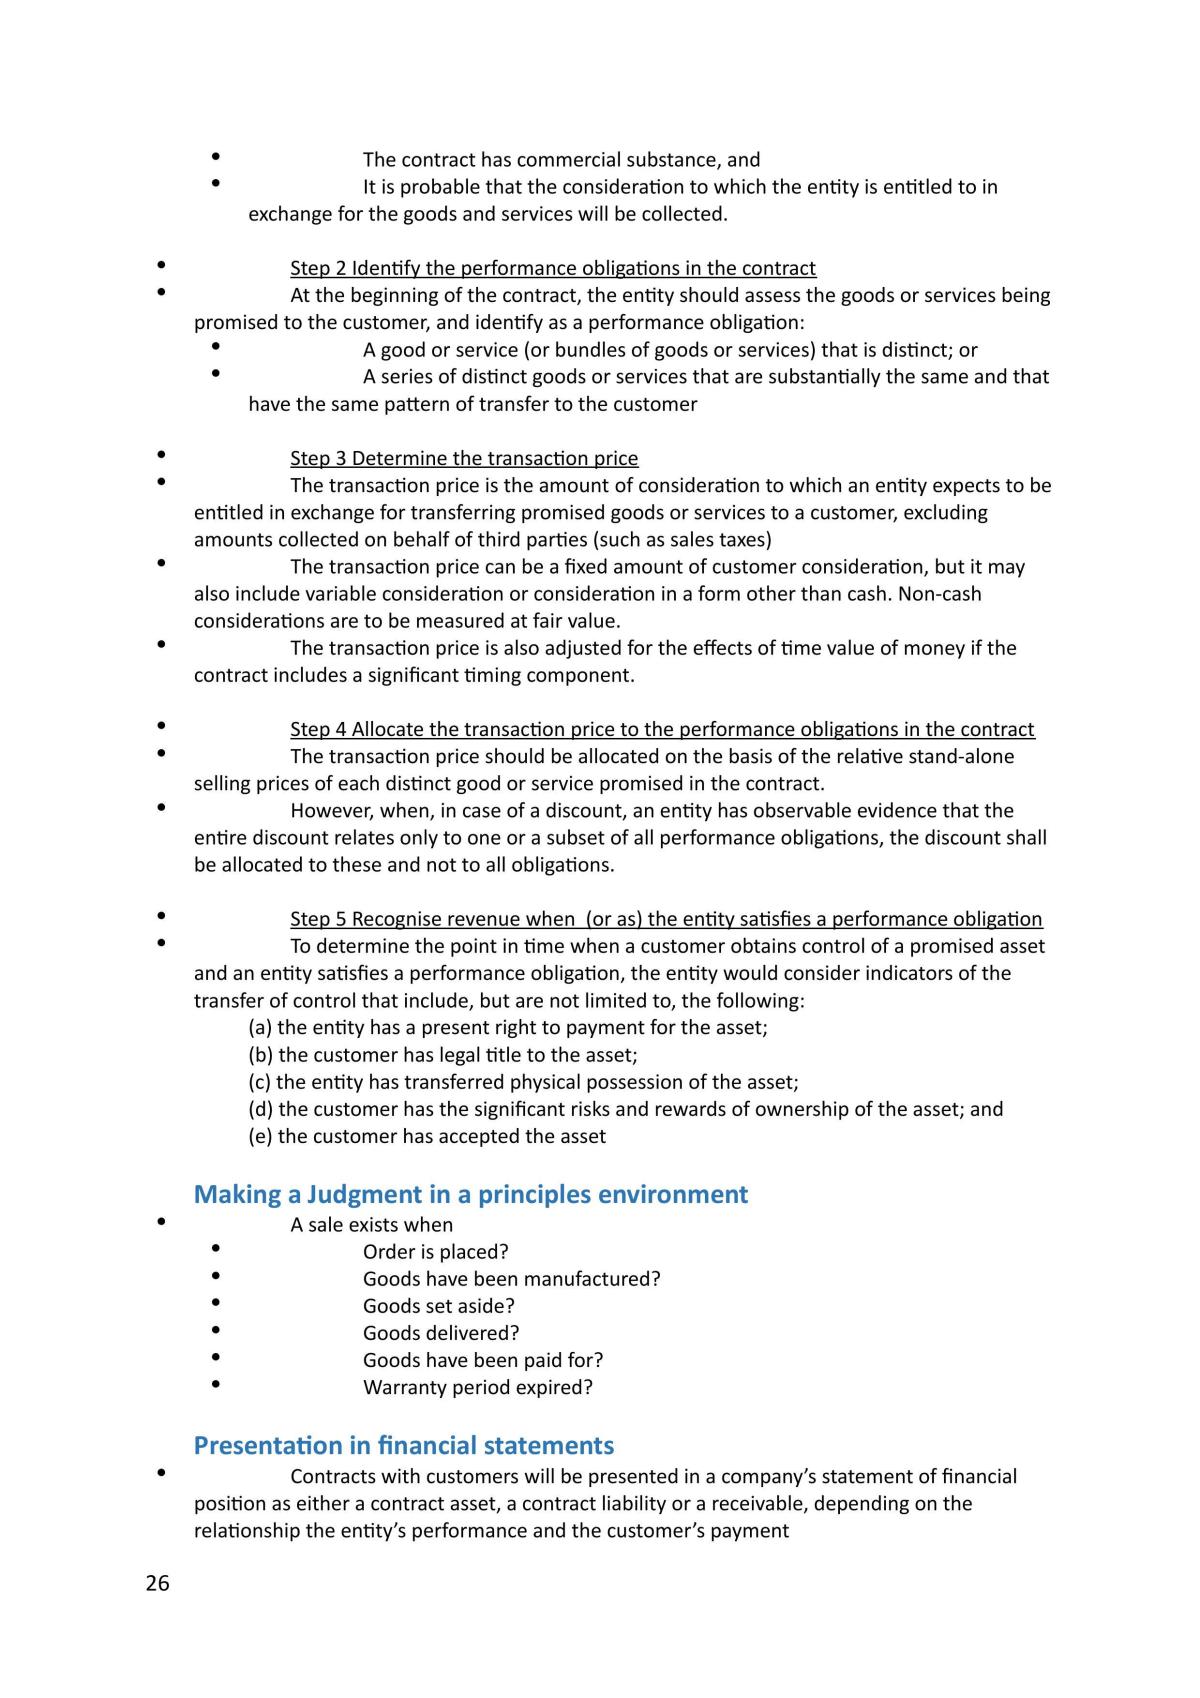 Auditing and Accounting Frameworks Study Guide - Page 26